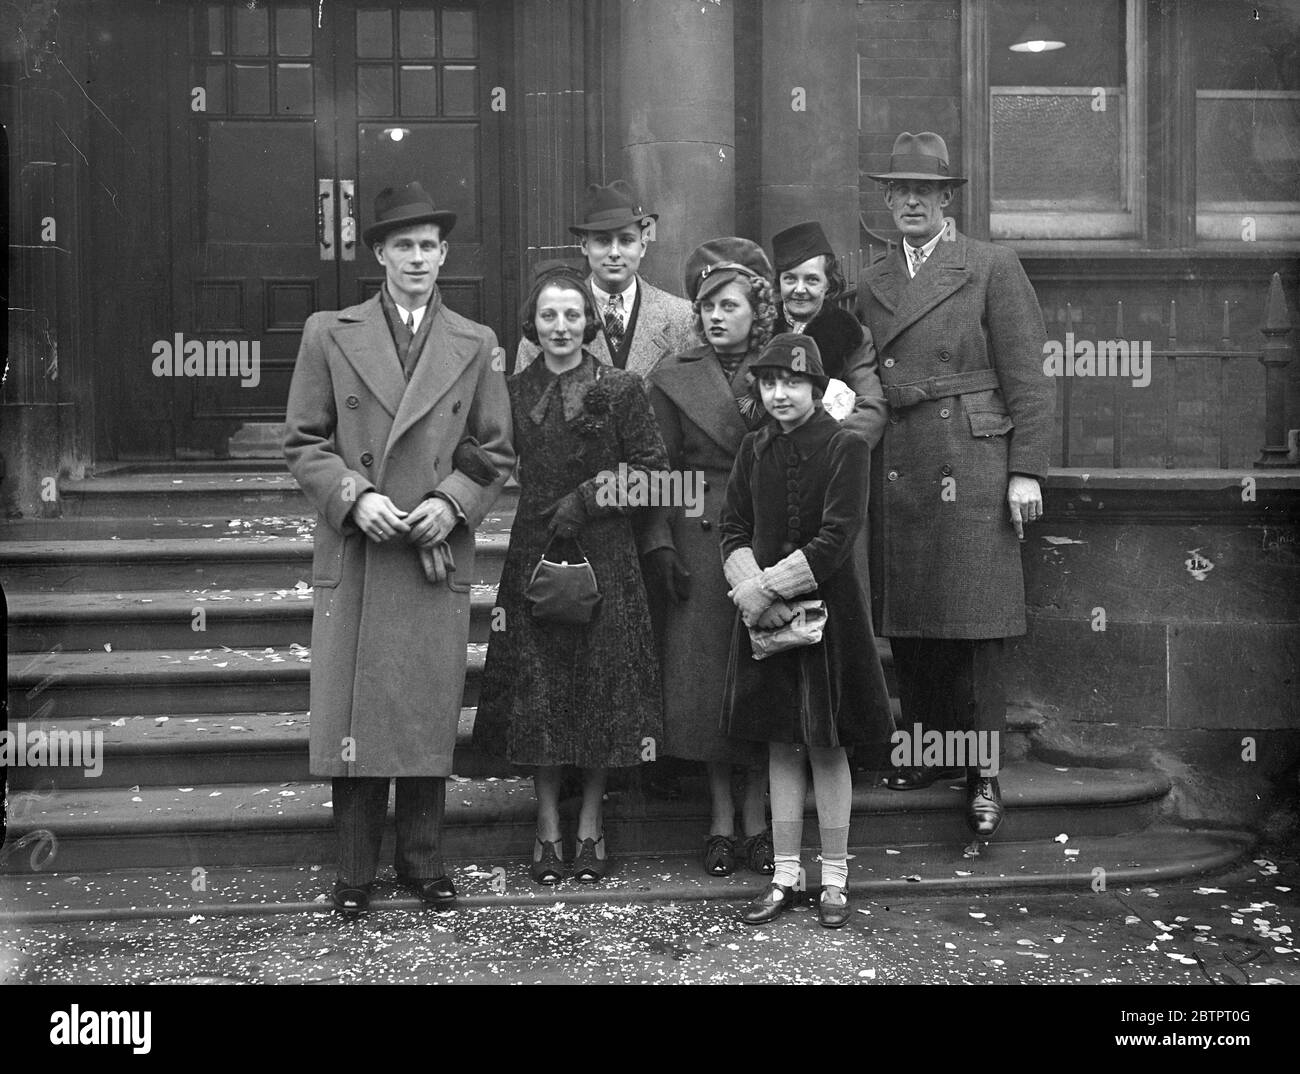 'Apache' touch at London wedding. A distinctive hat, that seams to have a touch of the 'Apache' style, worn by Miss Beatrice Watts (4th in from right) at the wedding of Mr G Walker of Sudbury and Miss B Sherman at the Paddington Register office, London. 27 November 1937 Stock Photo